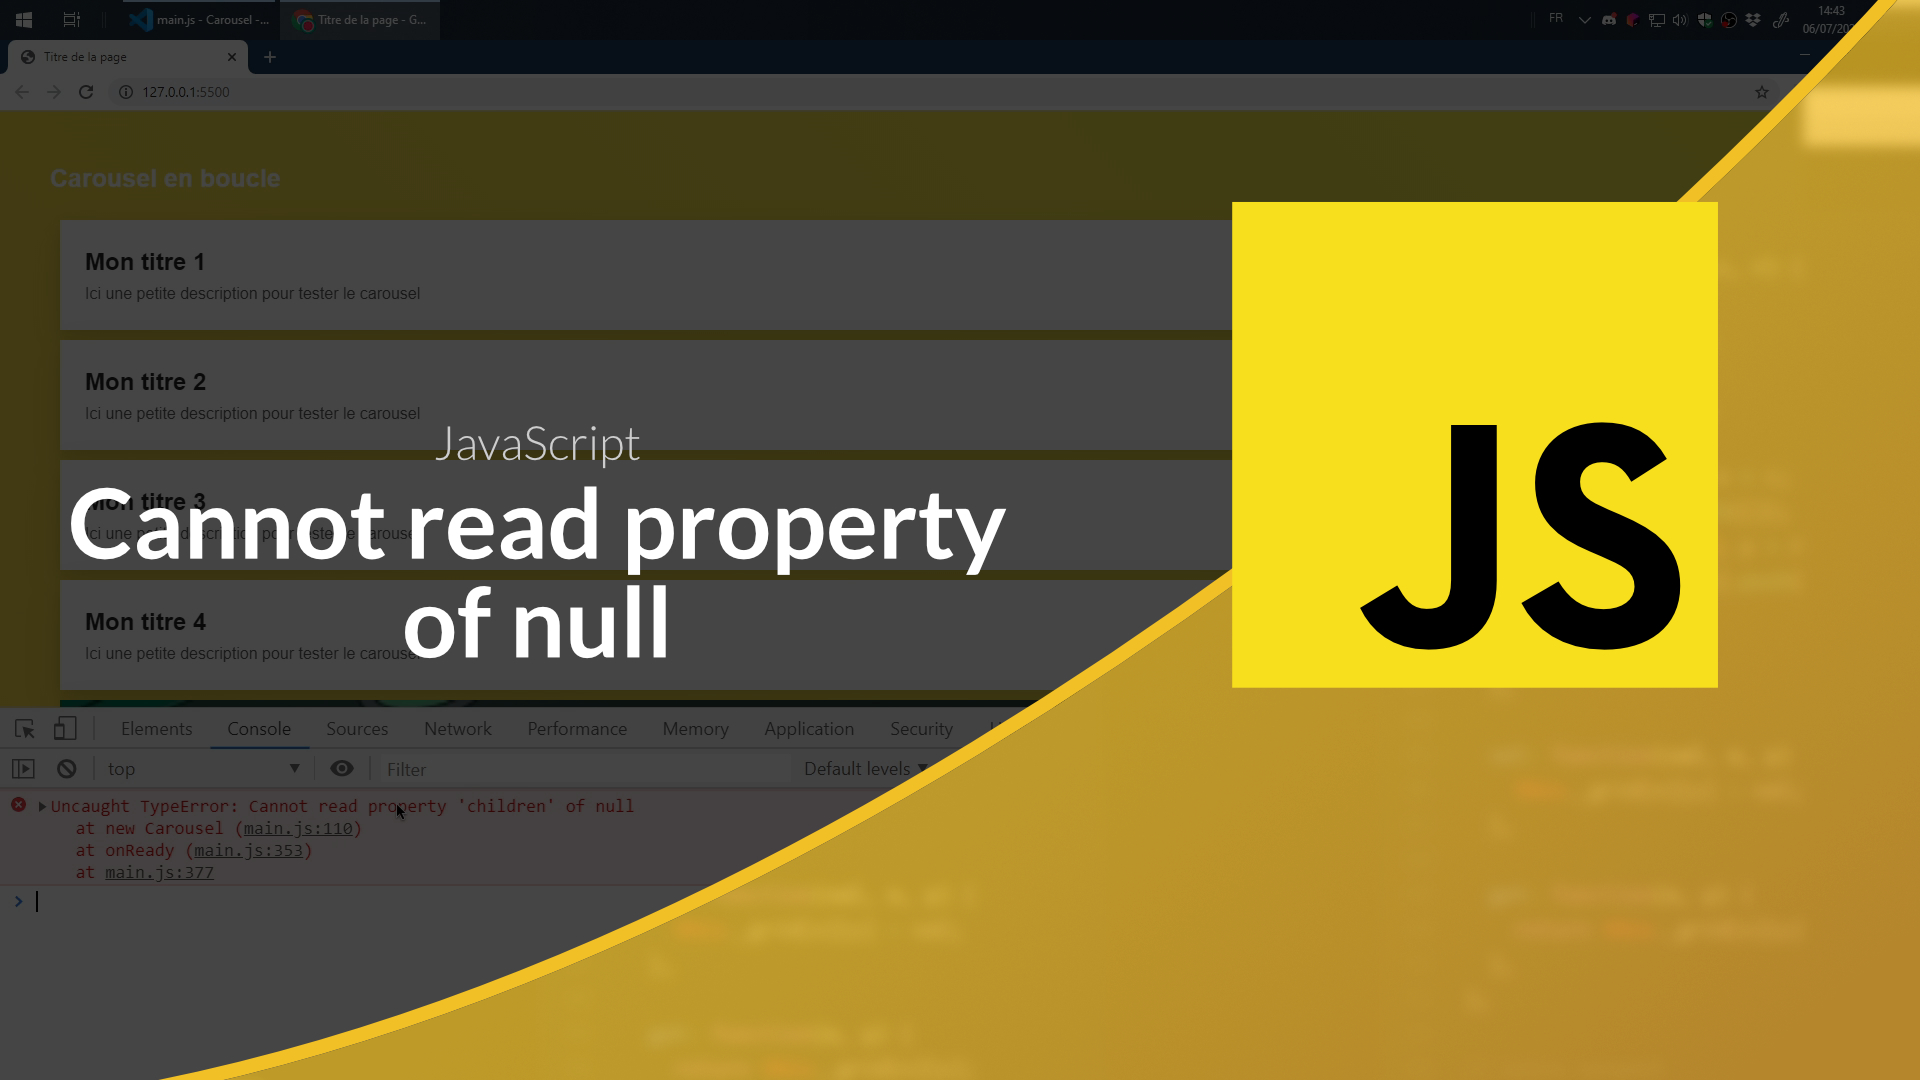 Скрипт null. REGENERATORRUNTIME is not defined. Null js. Cannot read properties of null reading ADDEVENTLISTENER. Null picture.